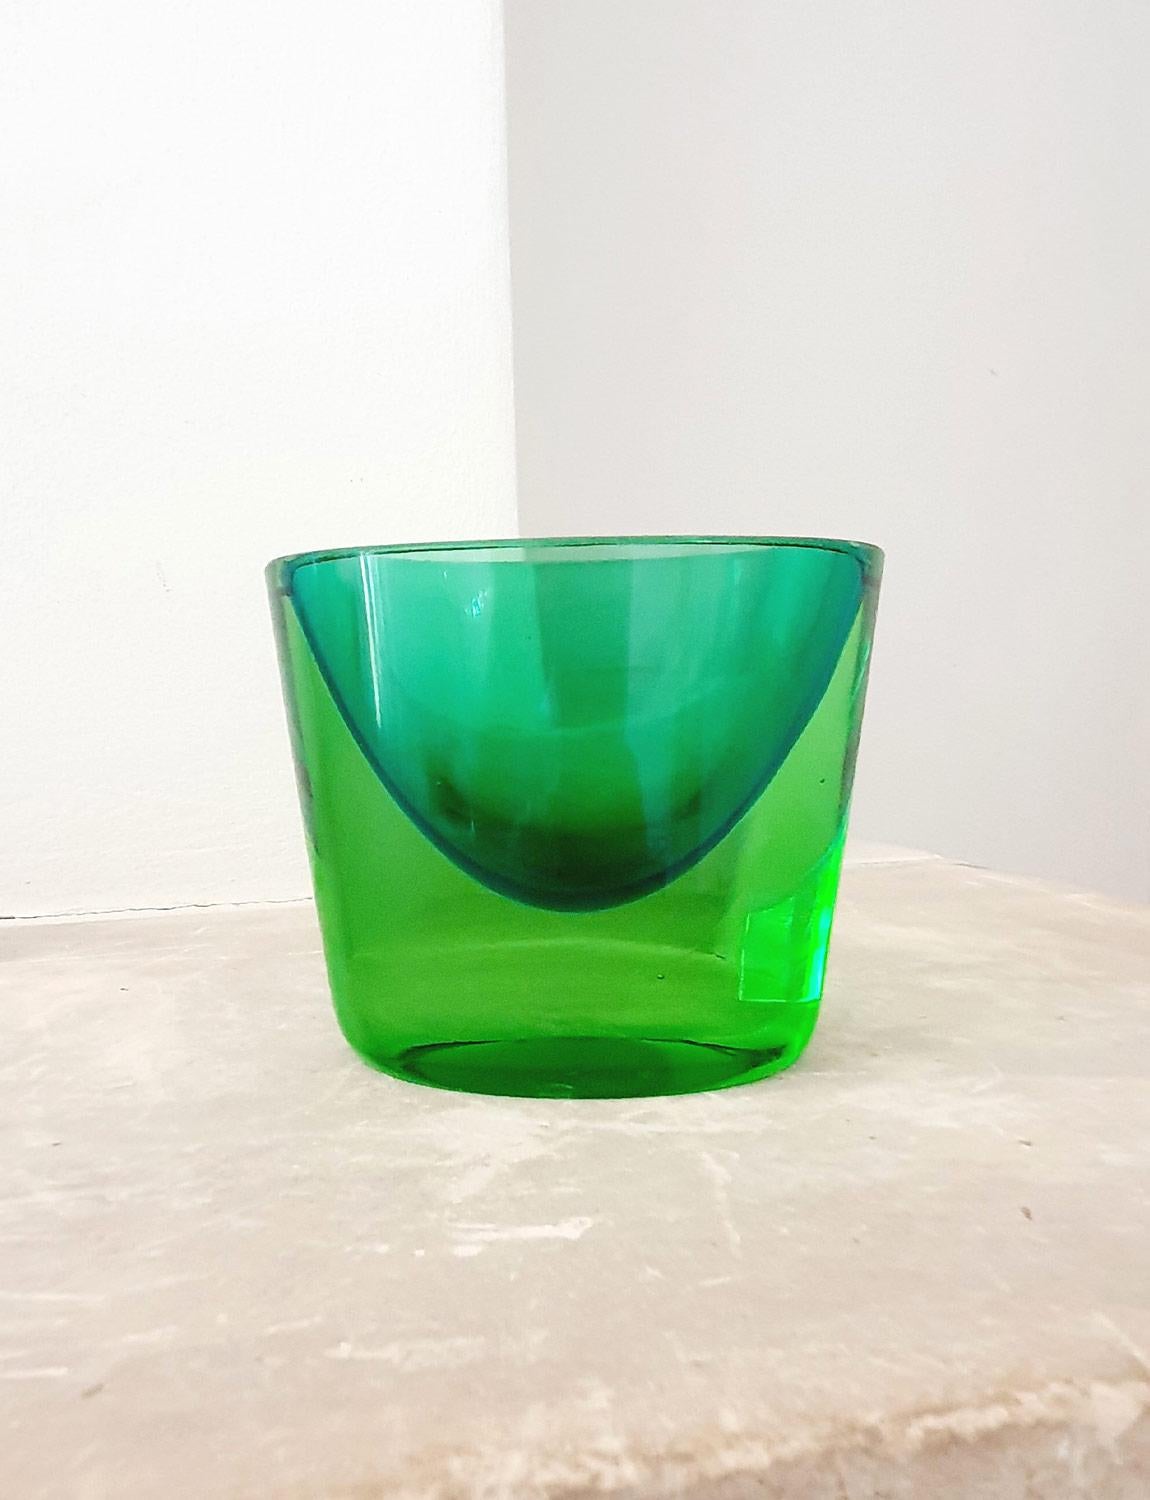 A perfect Flavio Poli sommerso small but chunky Murano glass vase in dark and light green. A beautiful piece in super condition.